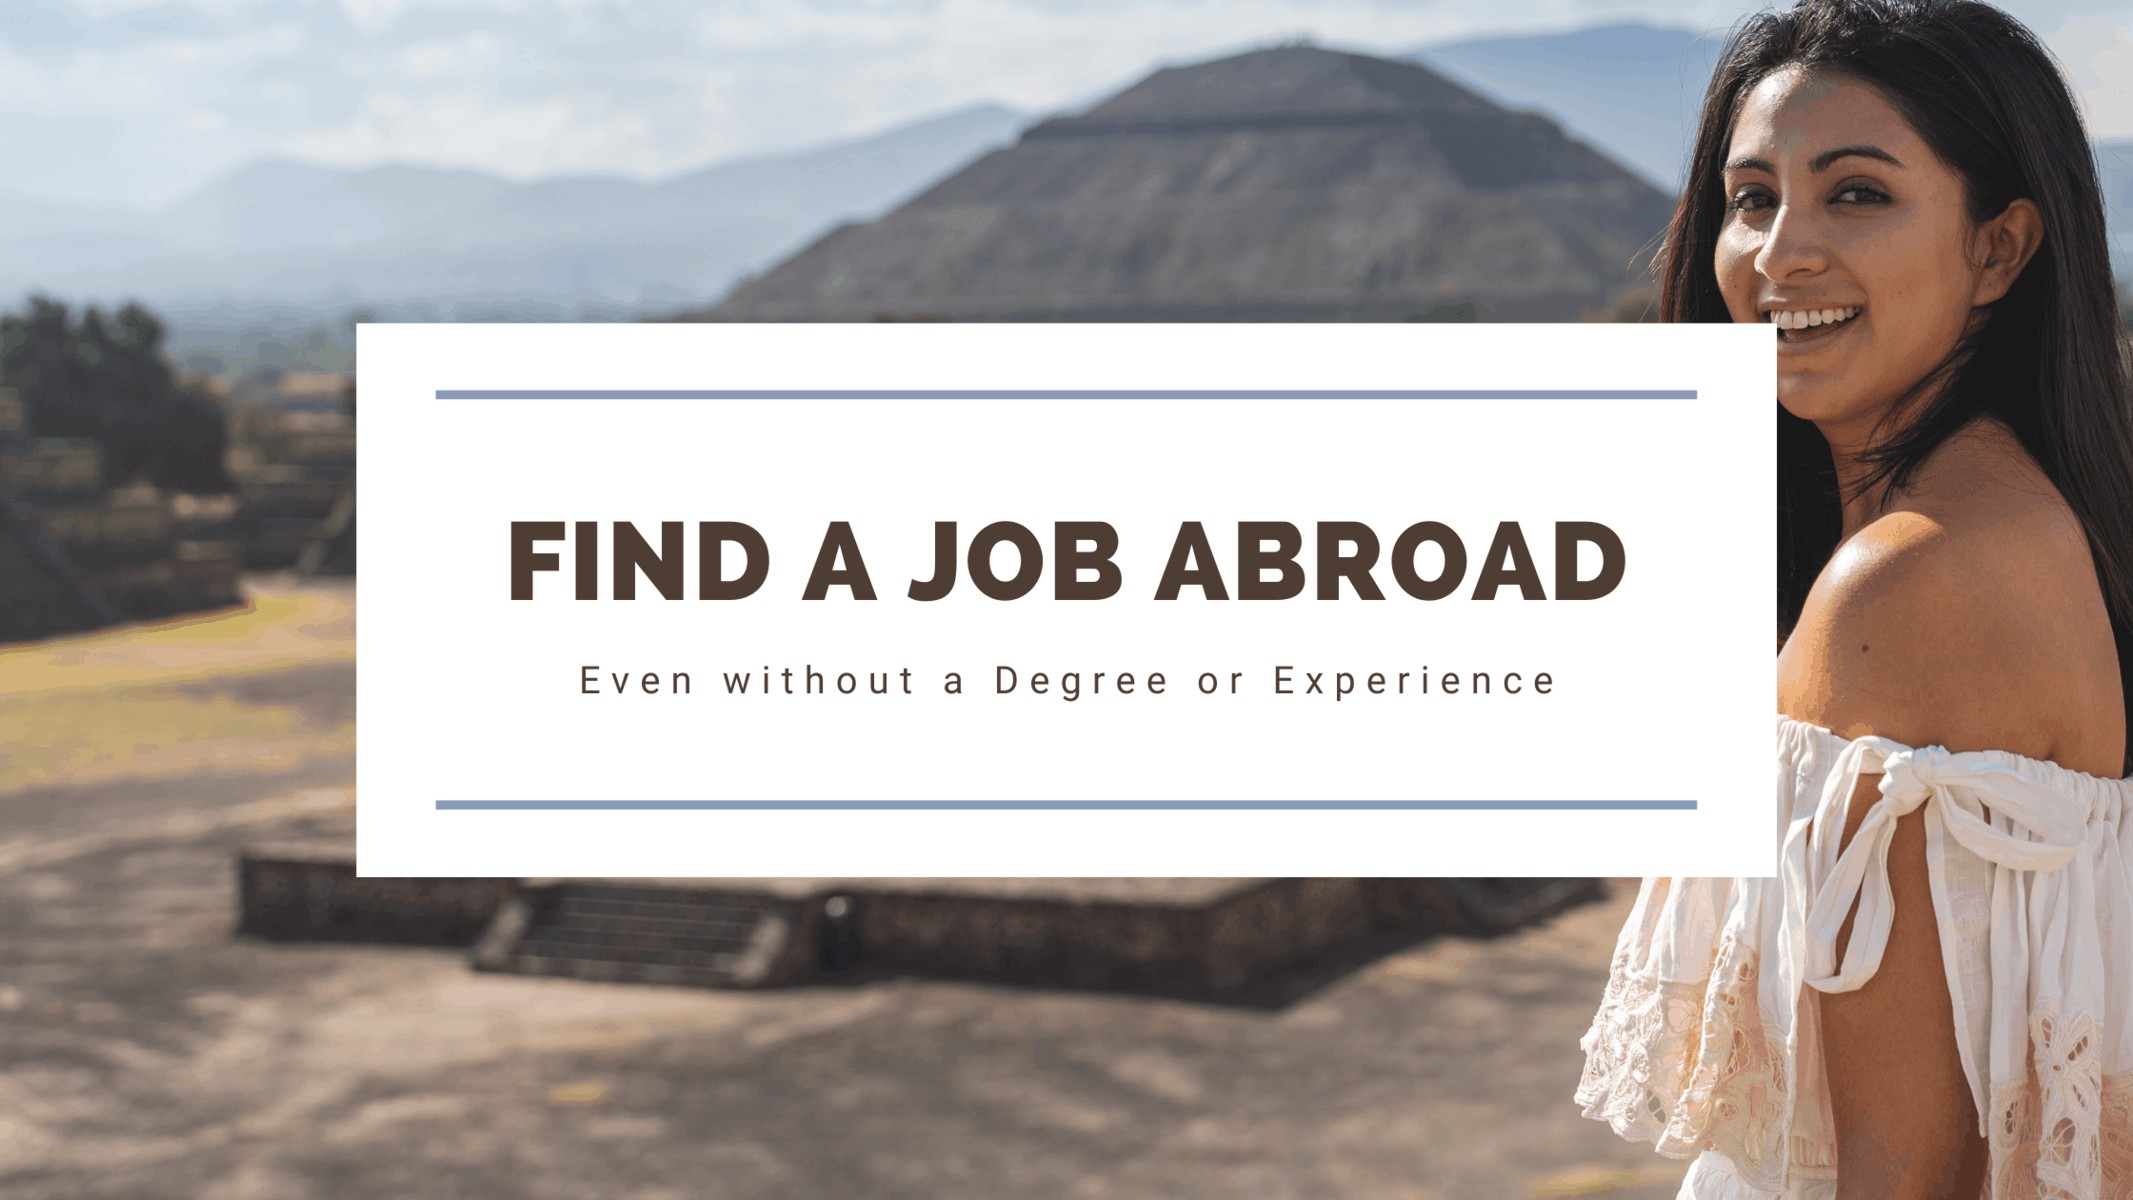 How to Find a Job Abroad (Even Without a Degree or Work Experience)